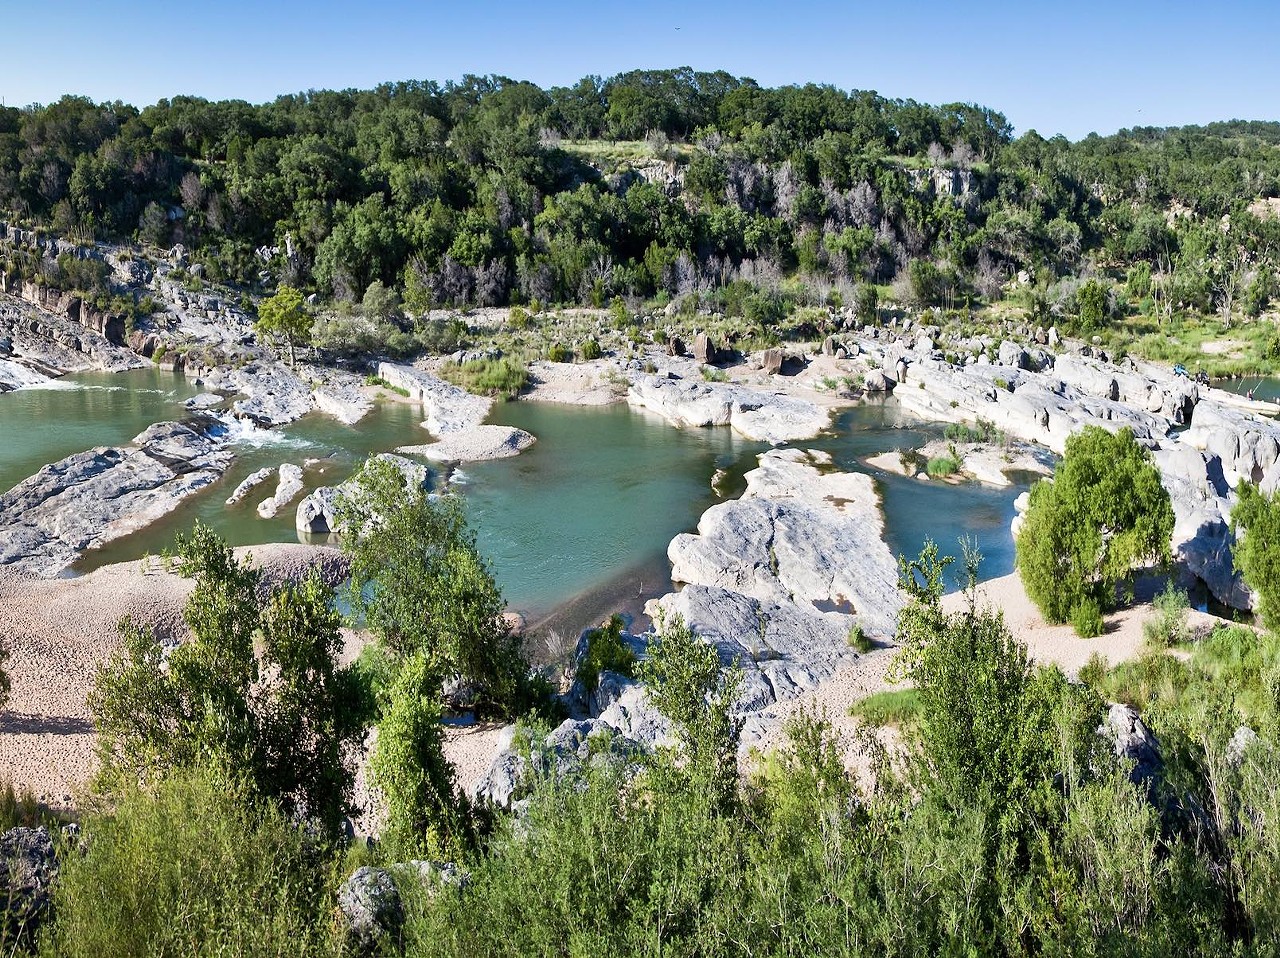 Pedernales Falls State Park
2585 Park Road 6026, Johnson City, (830) 868-7304, tpwd.texas.gov
Not too far from Johnson City are the tranquil, though sometimes turbulent, waters at Pedernales Falls. Certain areas are available to swim in, and there’s also chances for tubing, canoeing and kayaking down the river.